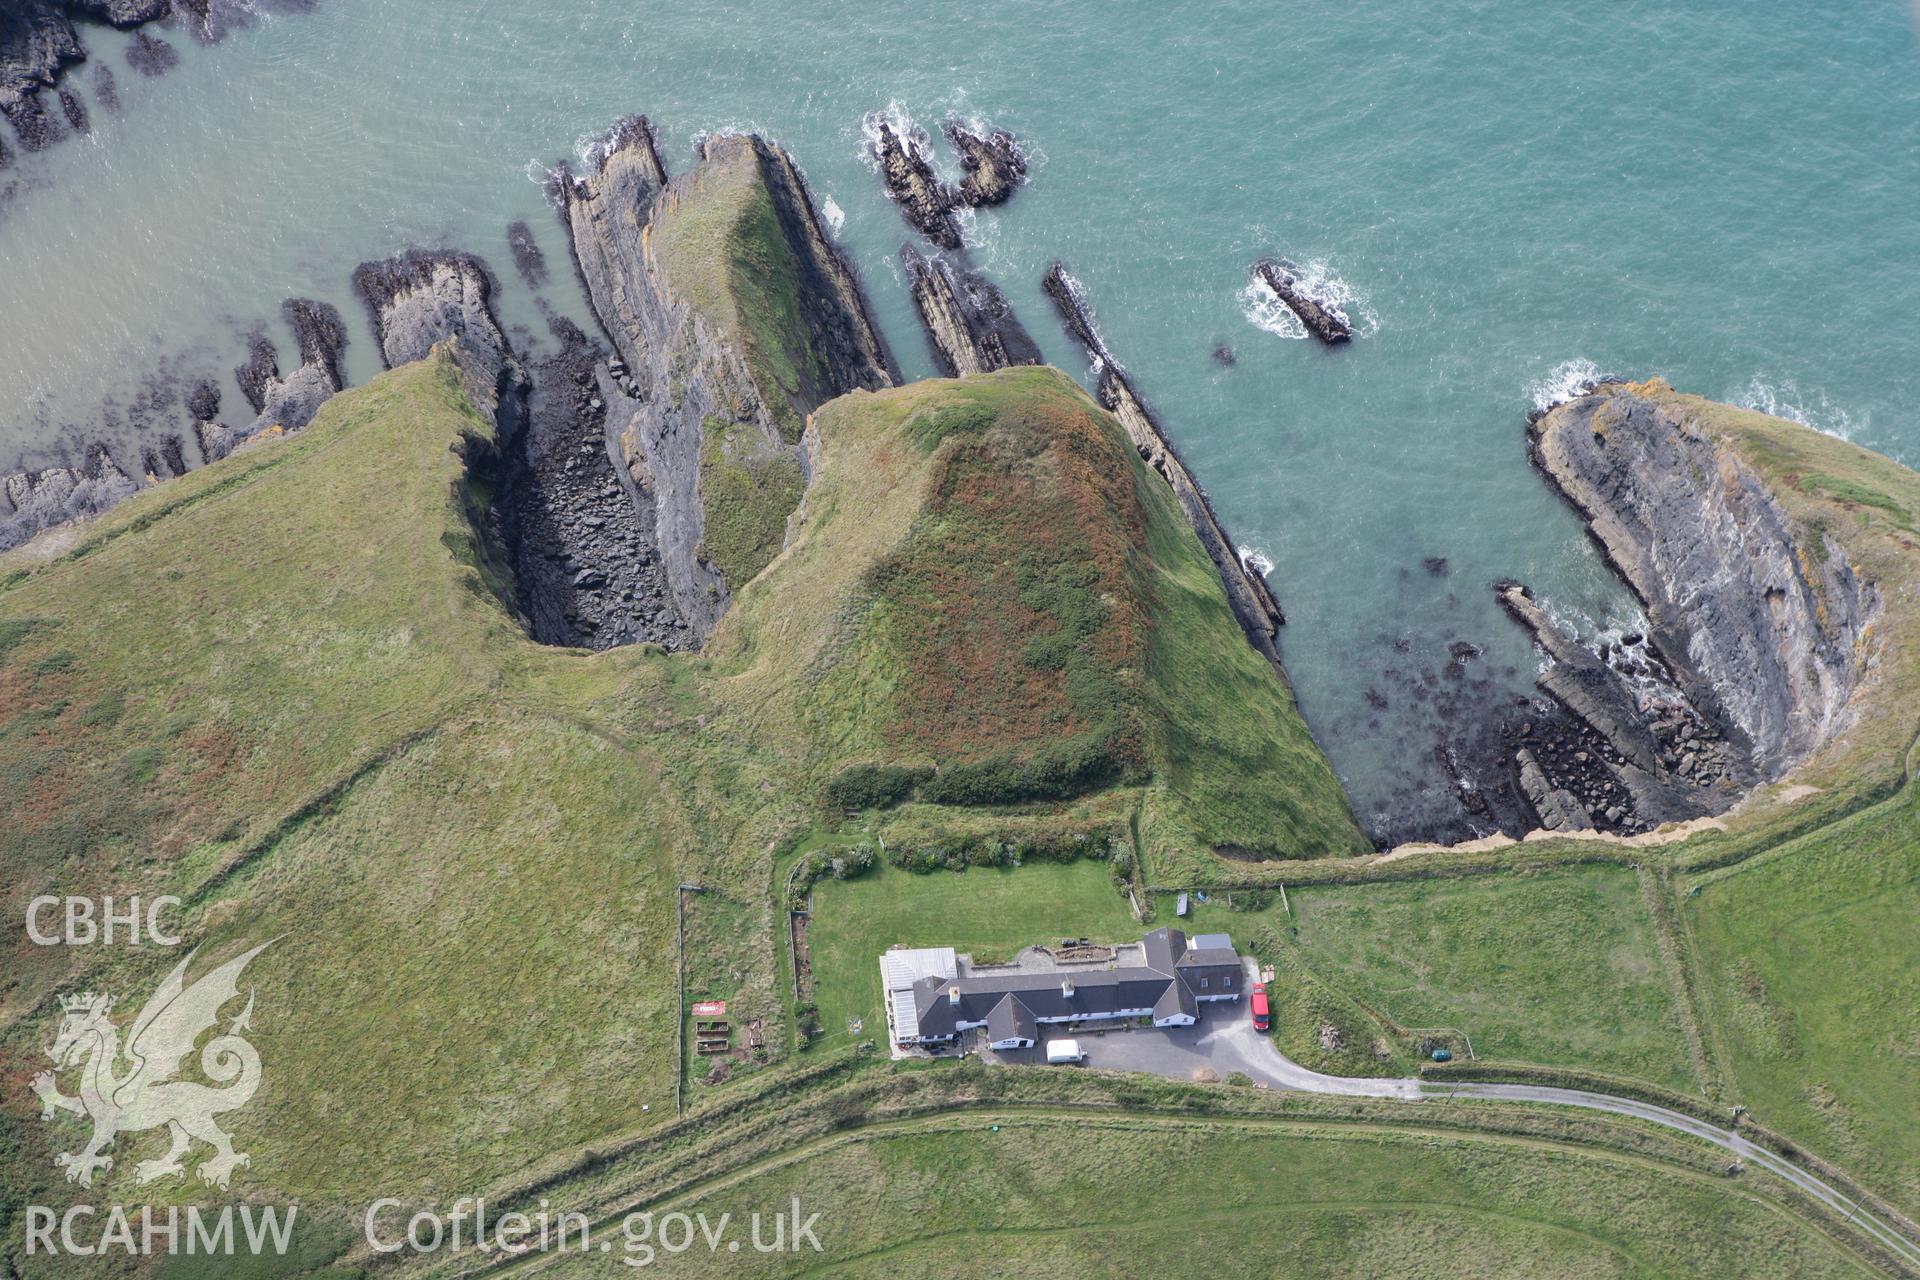 RCAHMW colour oblique photograph of Pen-Castell Promontory Fort. Taken by Toby Driver on 09/09/2010.